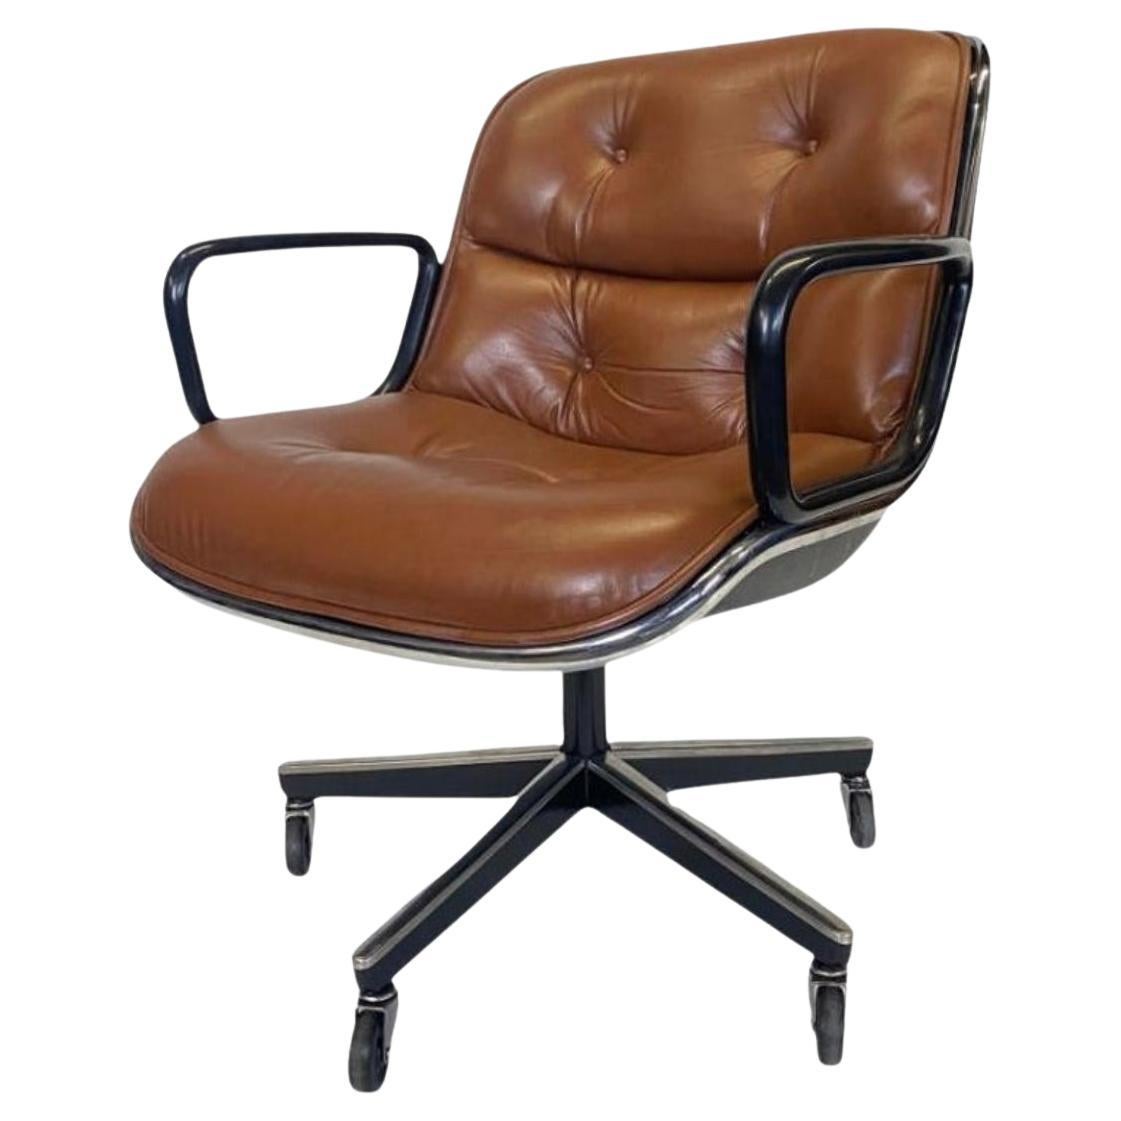 Pollock Executive Desk Chair in Brown Leather